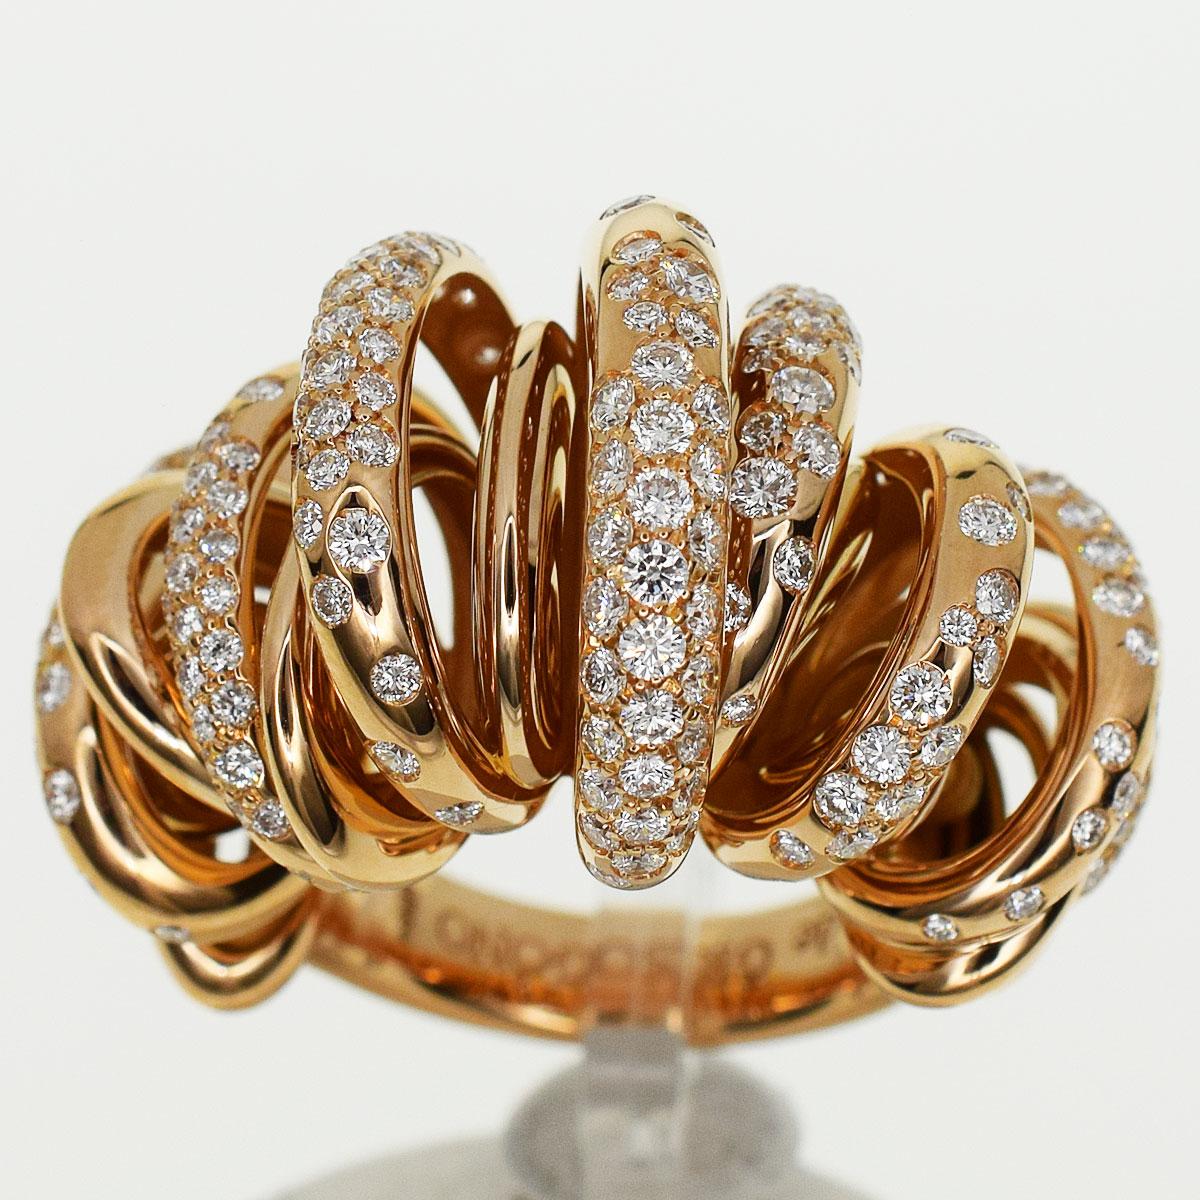 Brand:de GRISOGONO
Name:Sole Ring
Material:Diamond, K18 750 PG pink gold
Weight:18.0g（Approx)
Ring size:British & Australian:M  /   US & Canada:6 1/4 /  French & Russian:52 /  German:16 1/2 /  Japanese:  12 /Swiss: 12